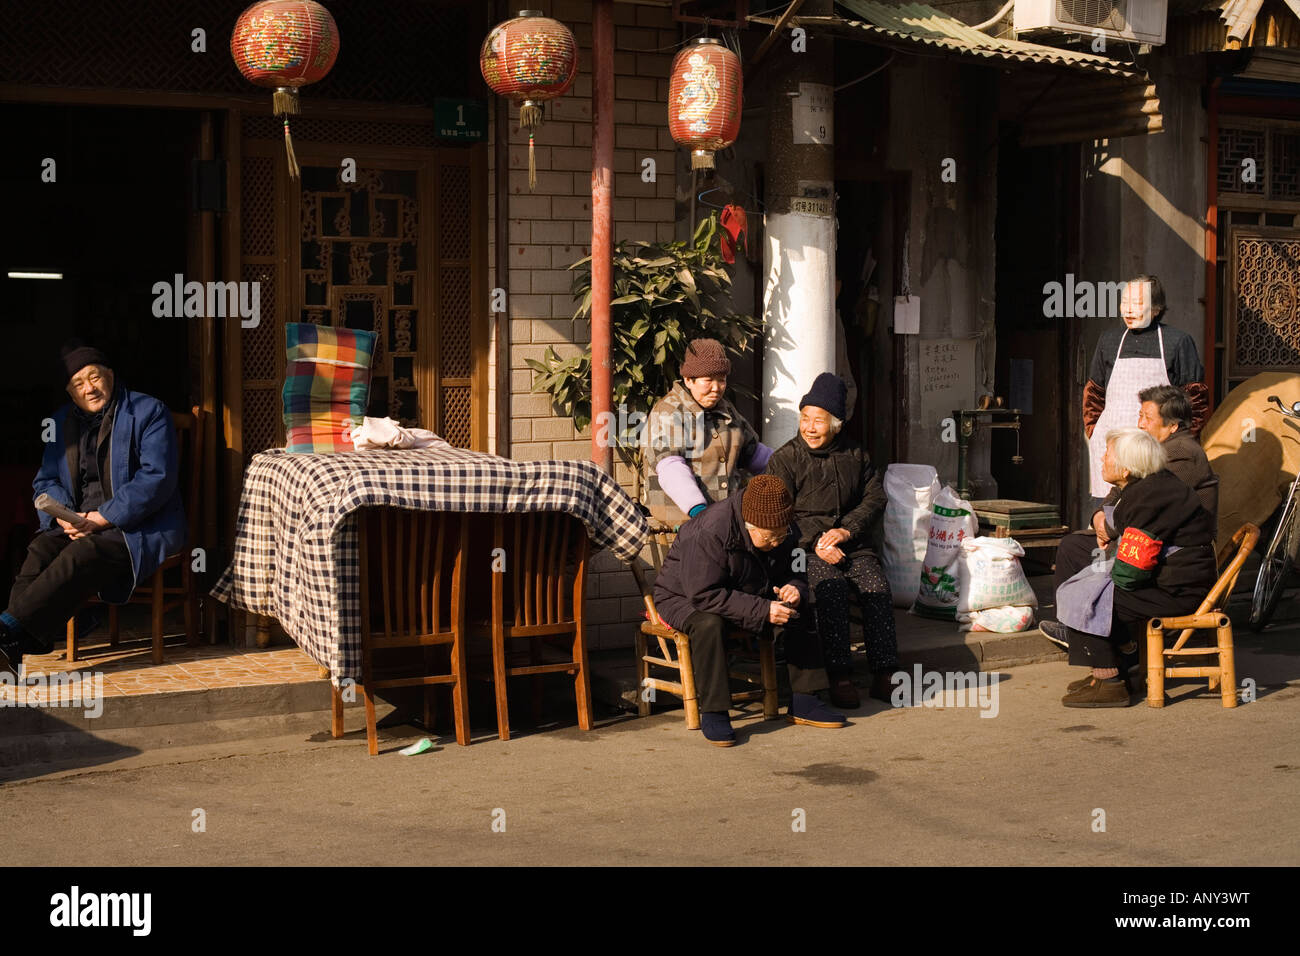 Bedding hangs over chairs to dry and air. Old Town, Shanghai, Peoples' Republic of China Stock Photo